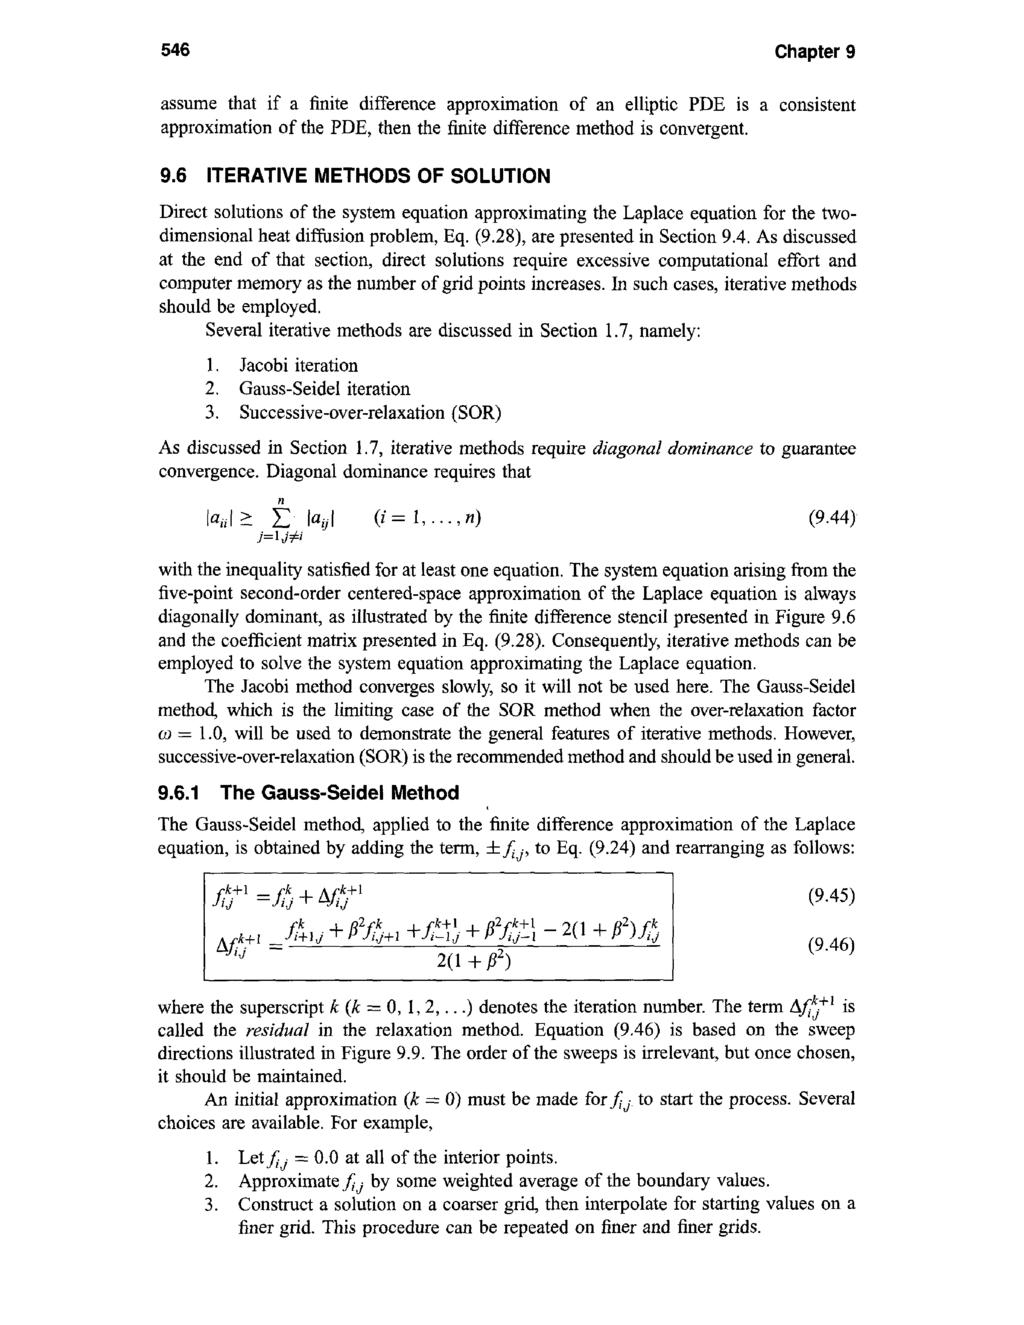 Gauss-Seidel Method Five-point finite difference approximation: The Gauss-Seidel method applied to finite difference approximation of the Laplace equation by adding and subtracting the term f ij to